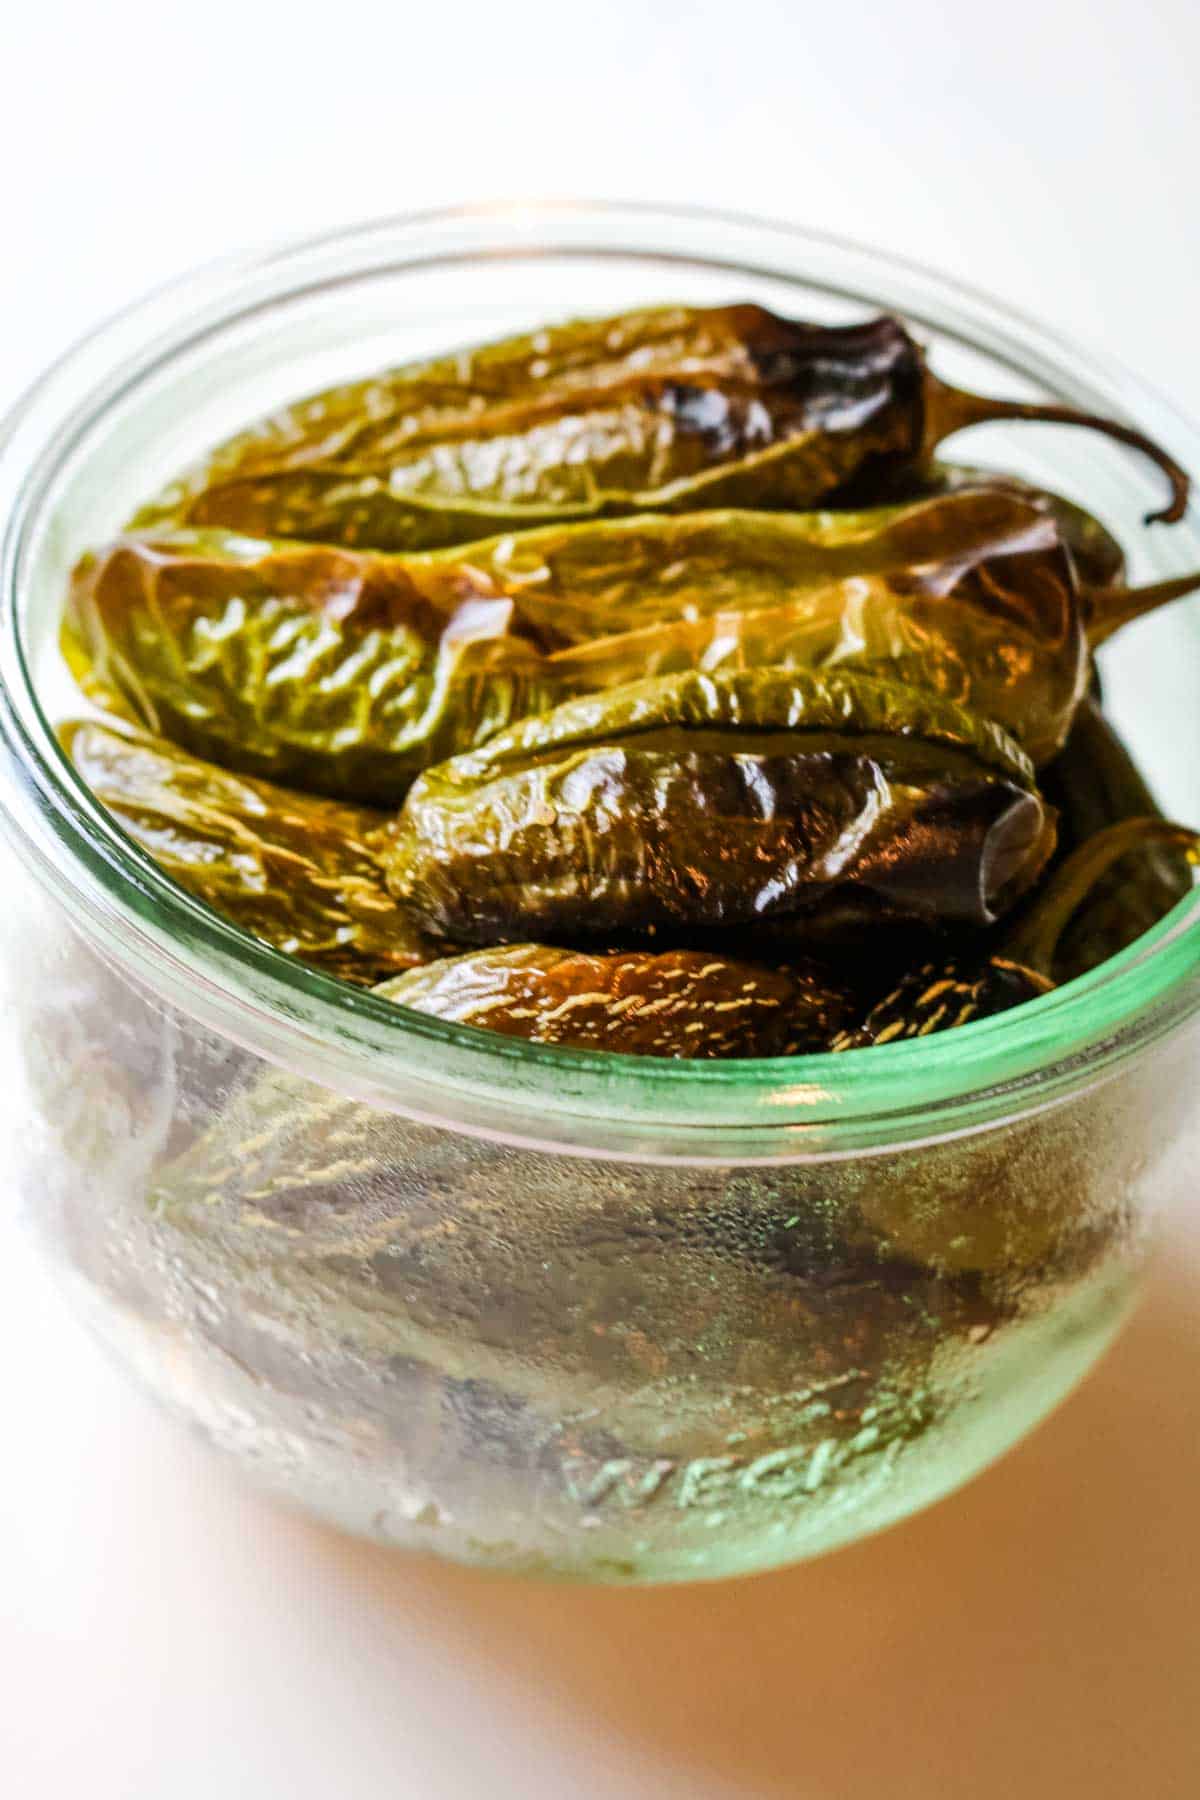 roasted jalapeno peppers in a weck jar.